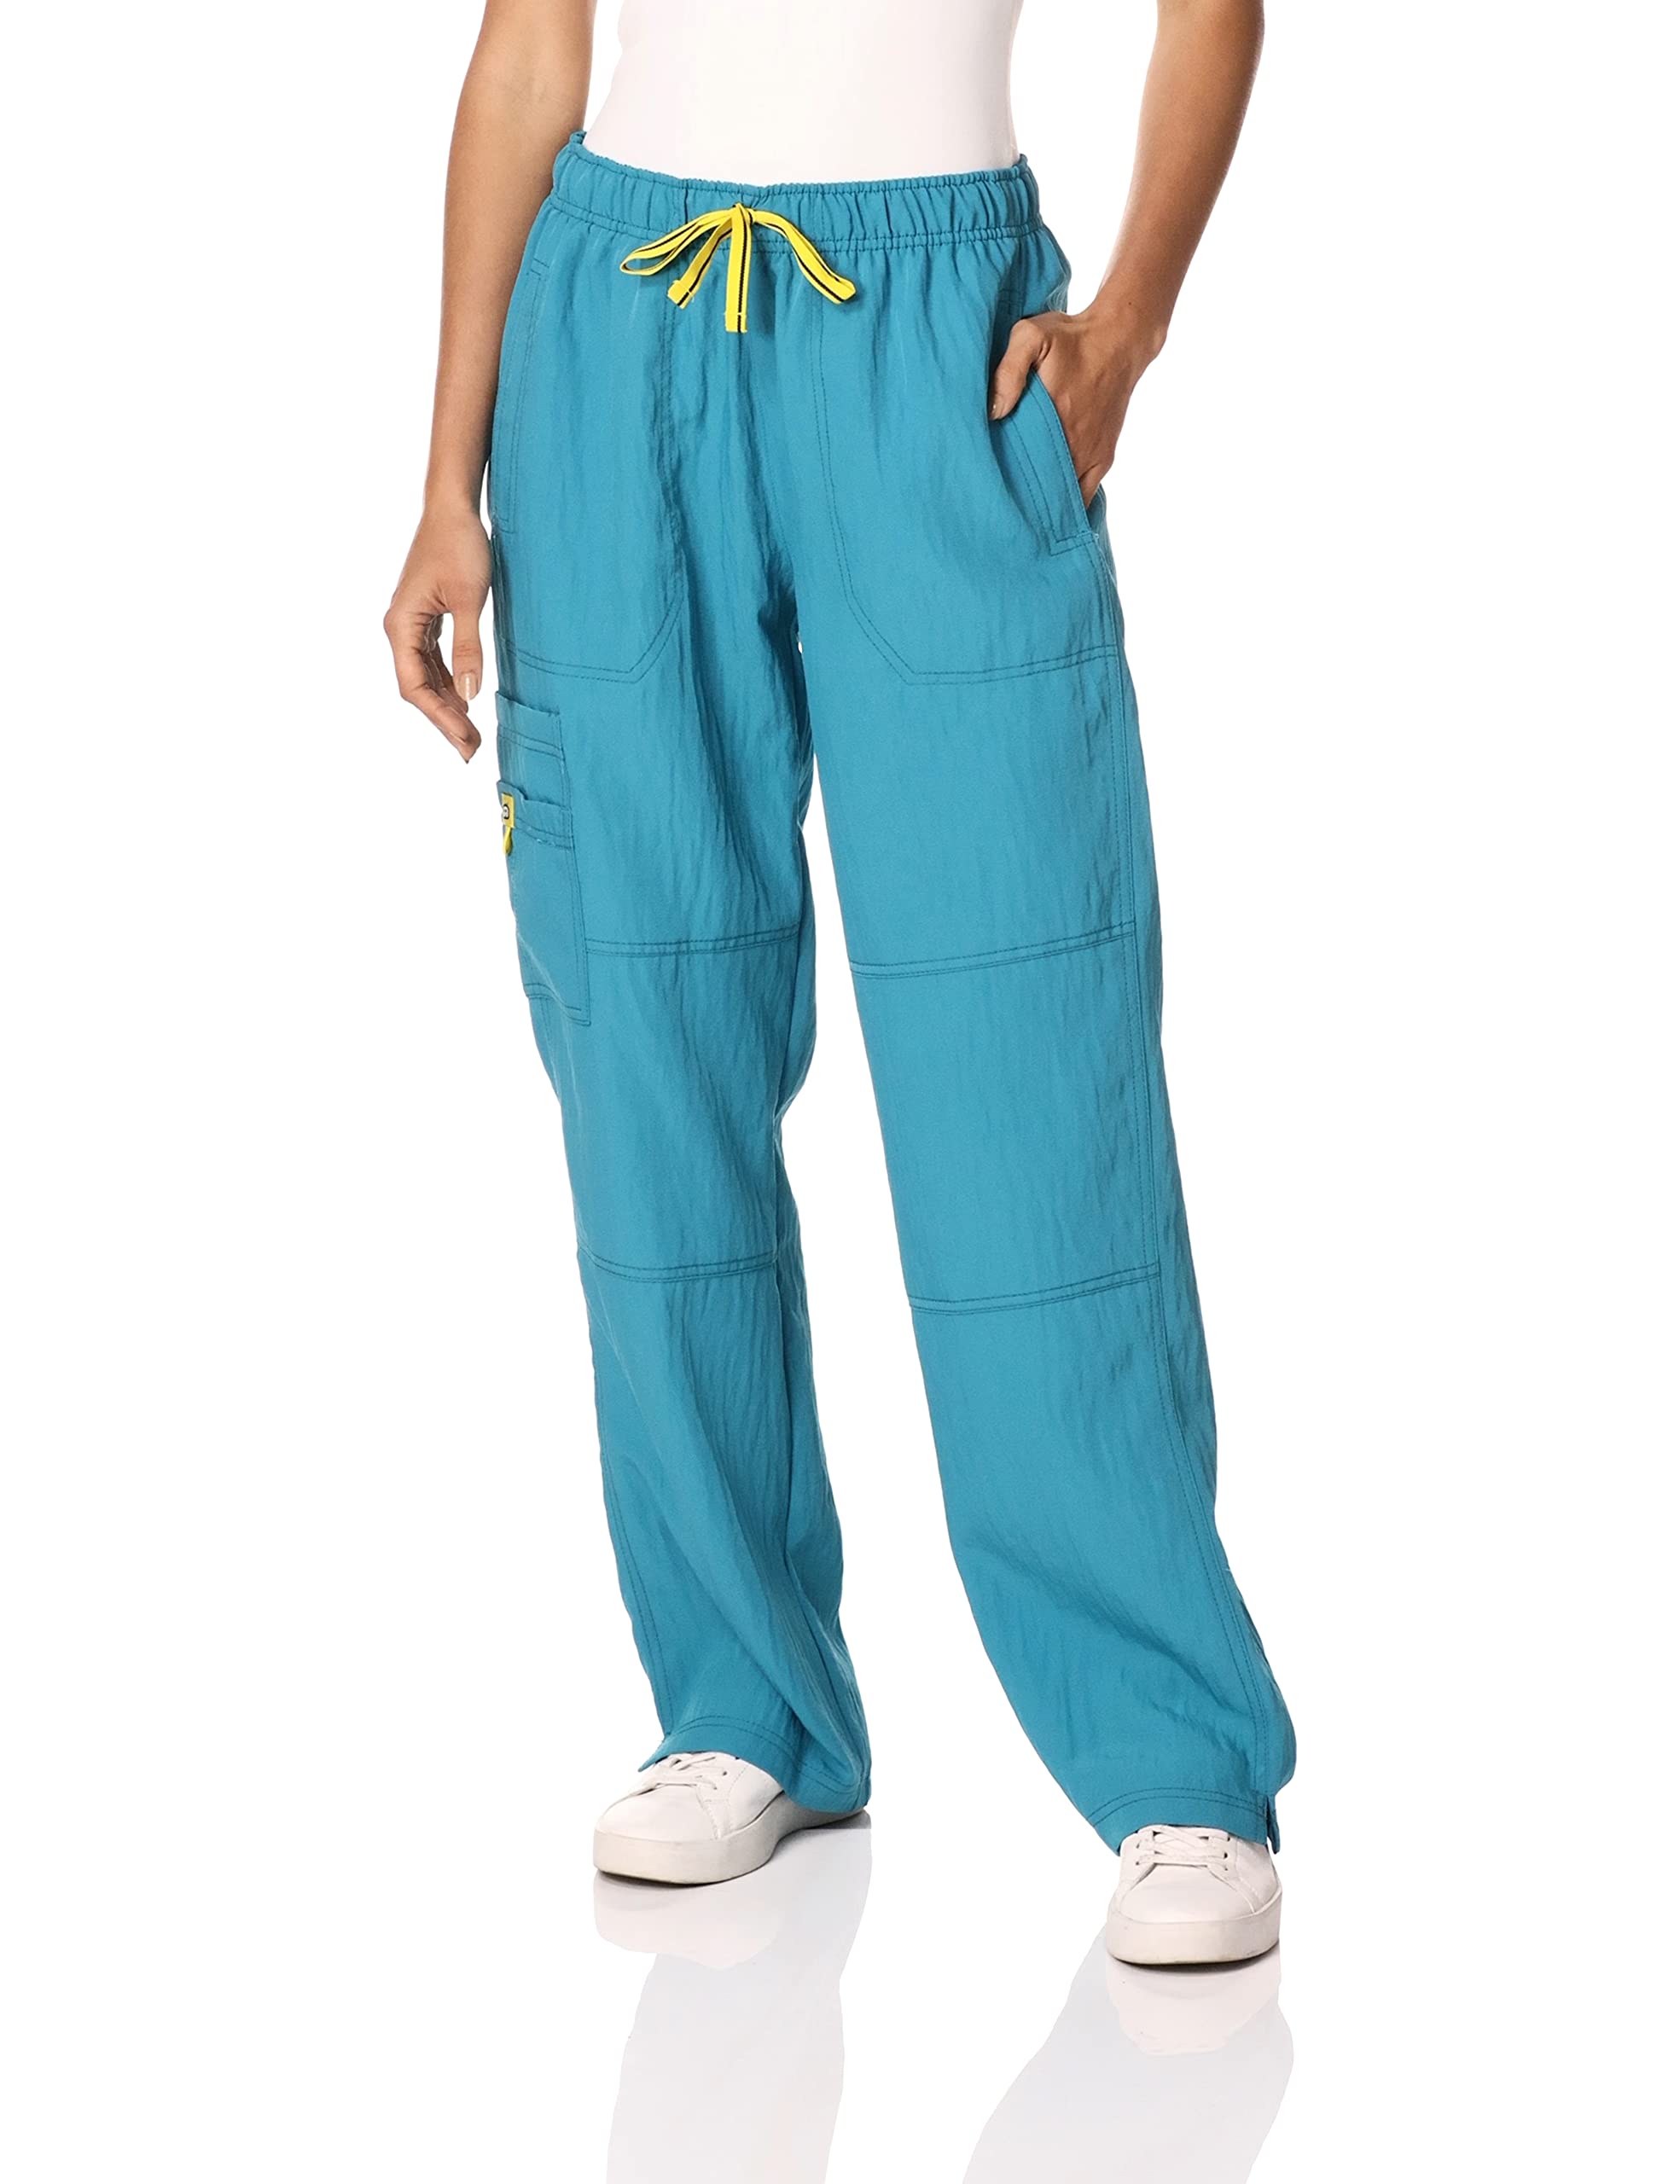 Wonderwink Womens Four Stretch Womens Cargo Medical Scrubs Pants, Royal, Large Tall Us